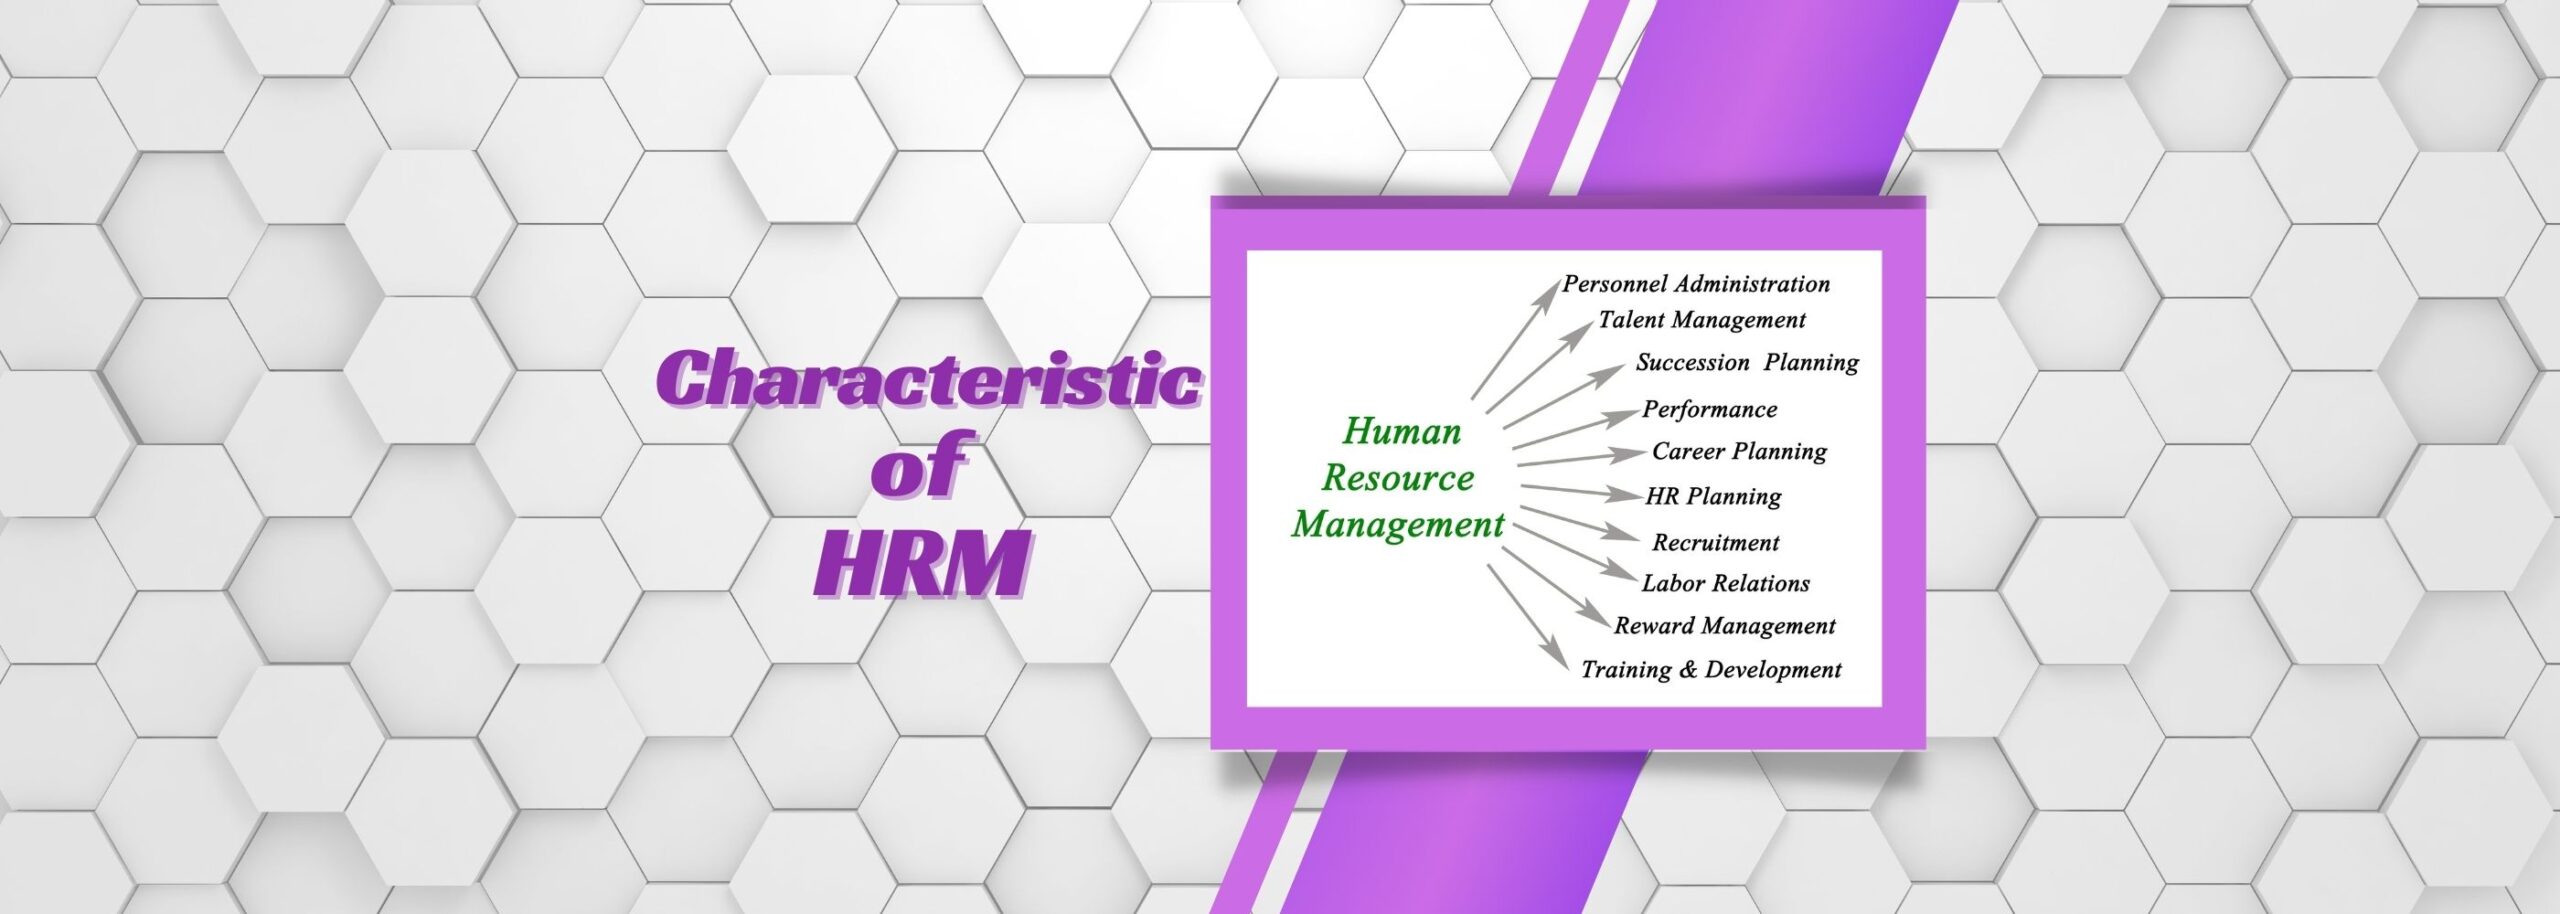 characteristic of hrm